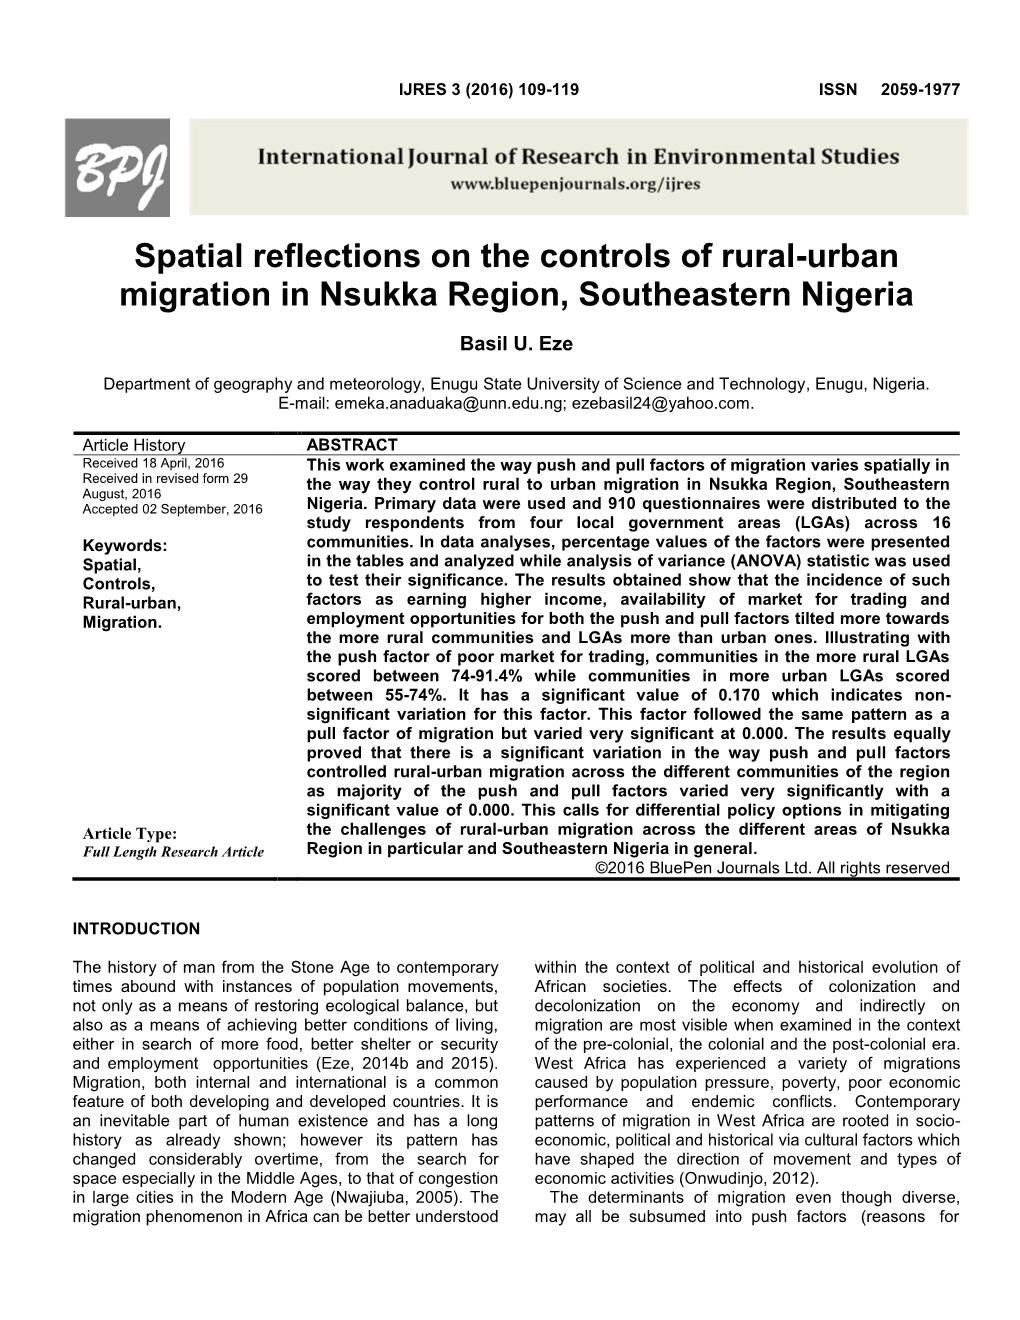 Spatial Reflections on the Controls of Rural-Urban Migration in Nsukka Region, Southeastern Nigeria